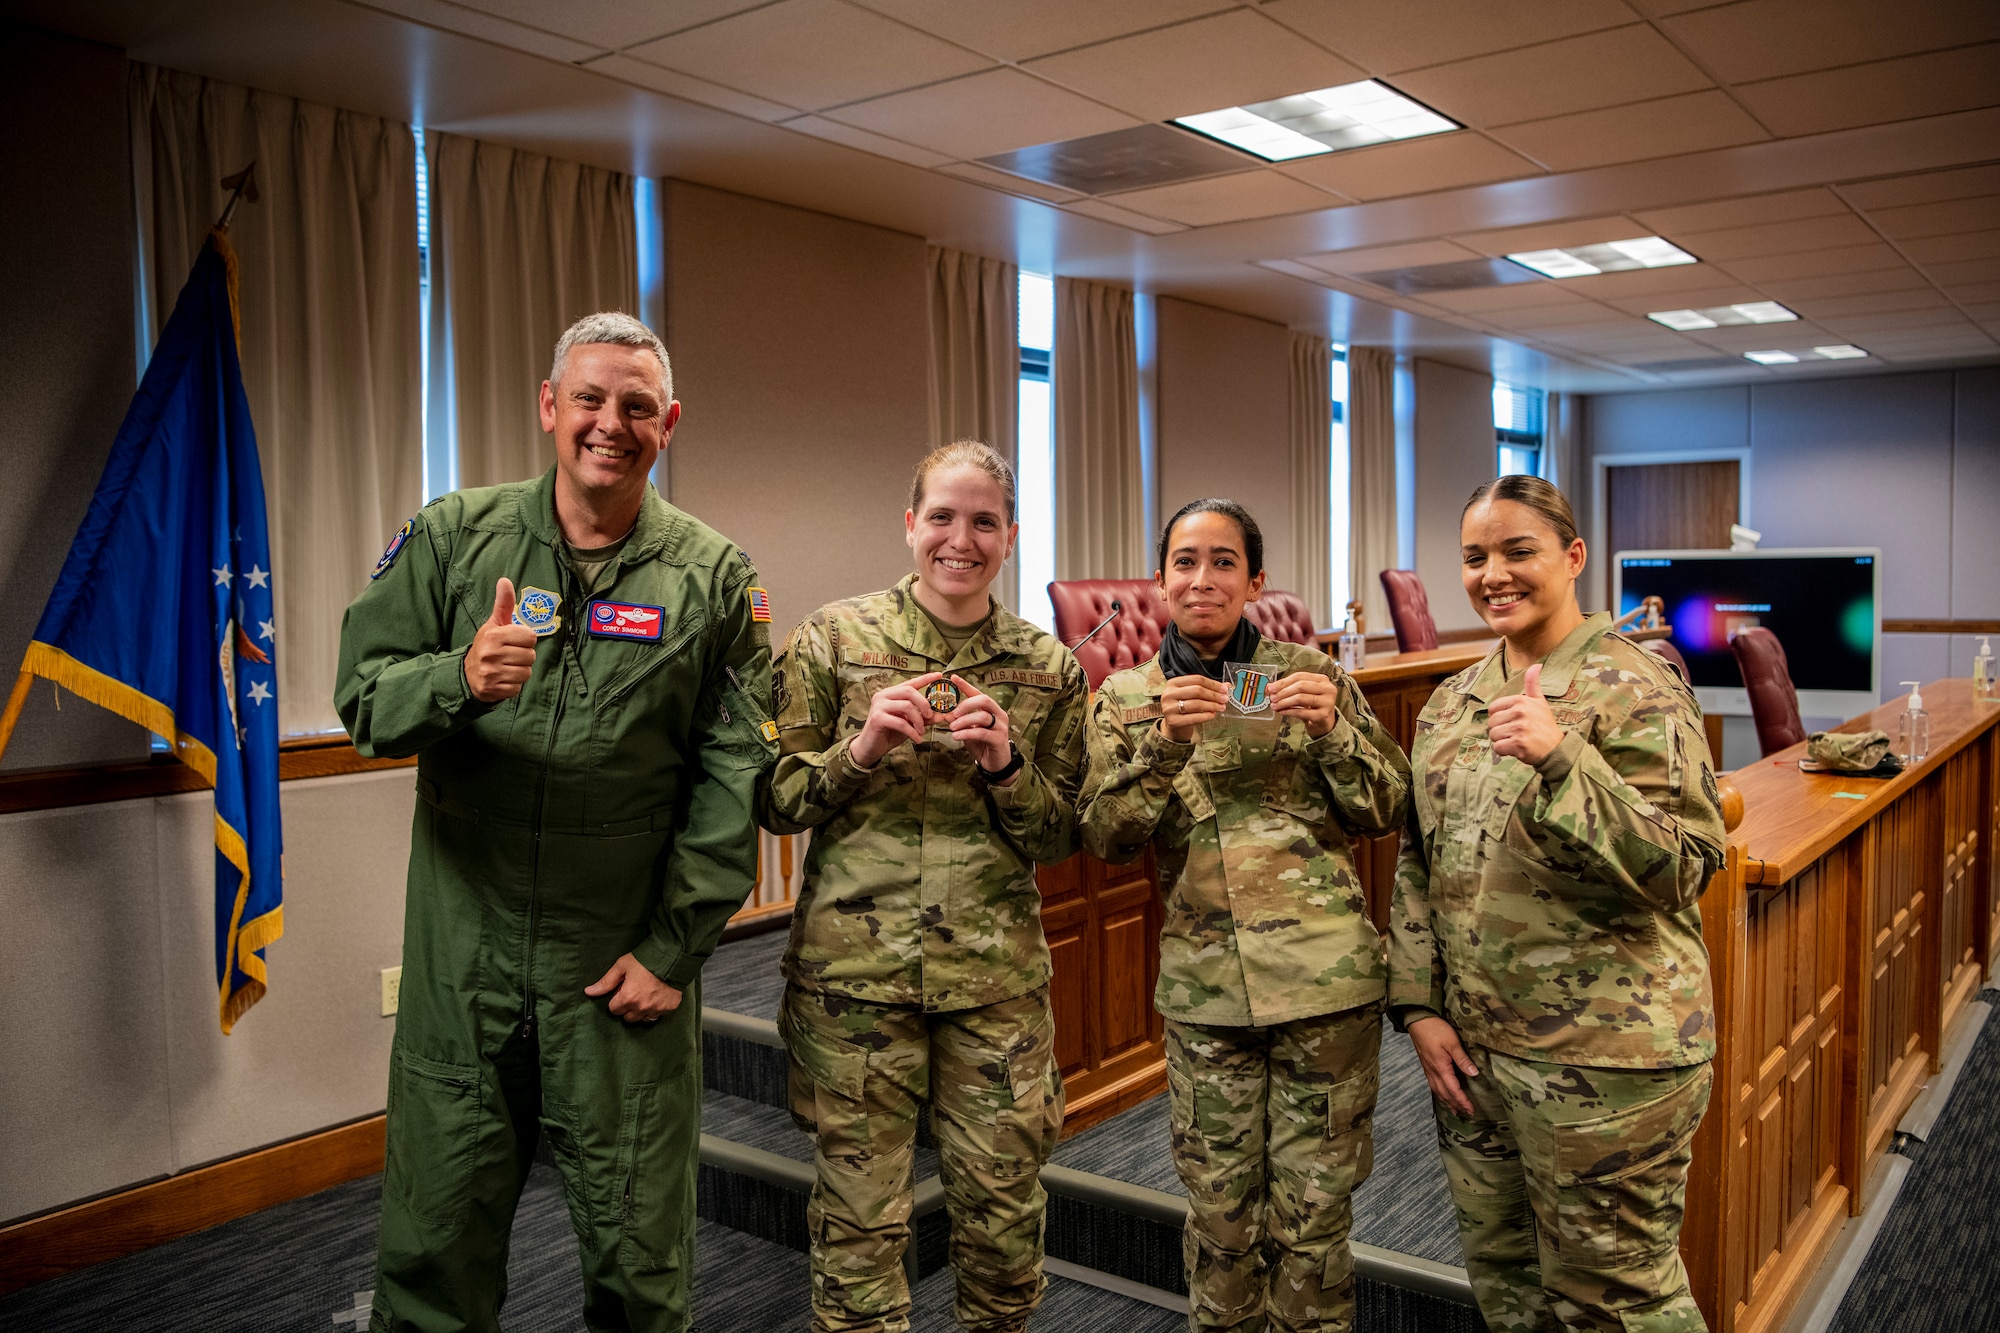 Four Airmen are standing next to each other, the two Airmen in the center are holding coins they just received from base leadership.